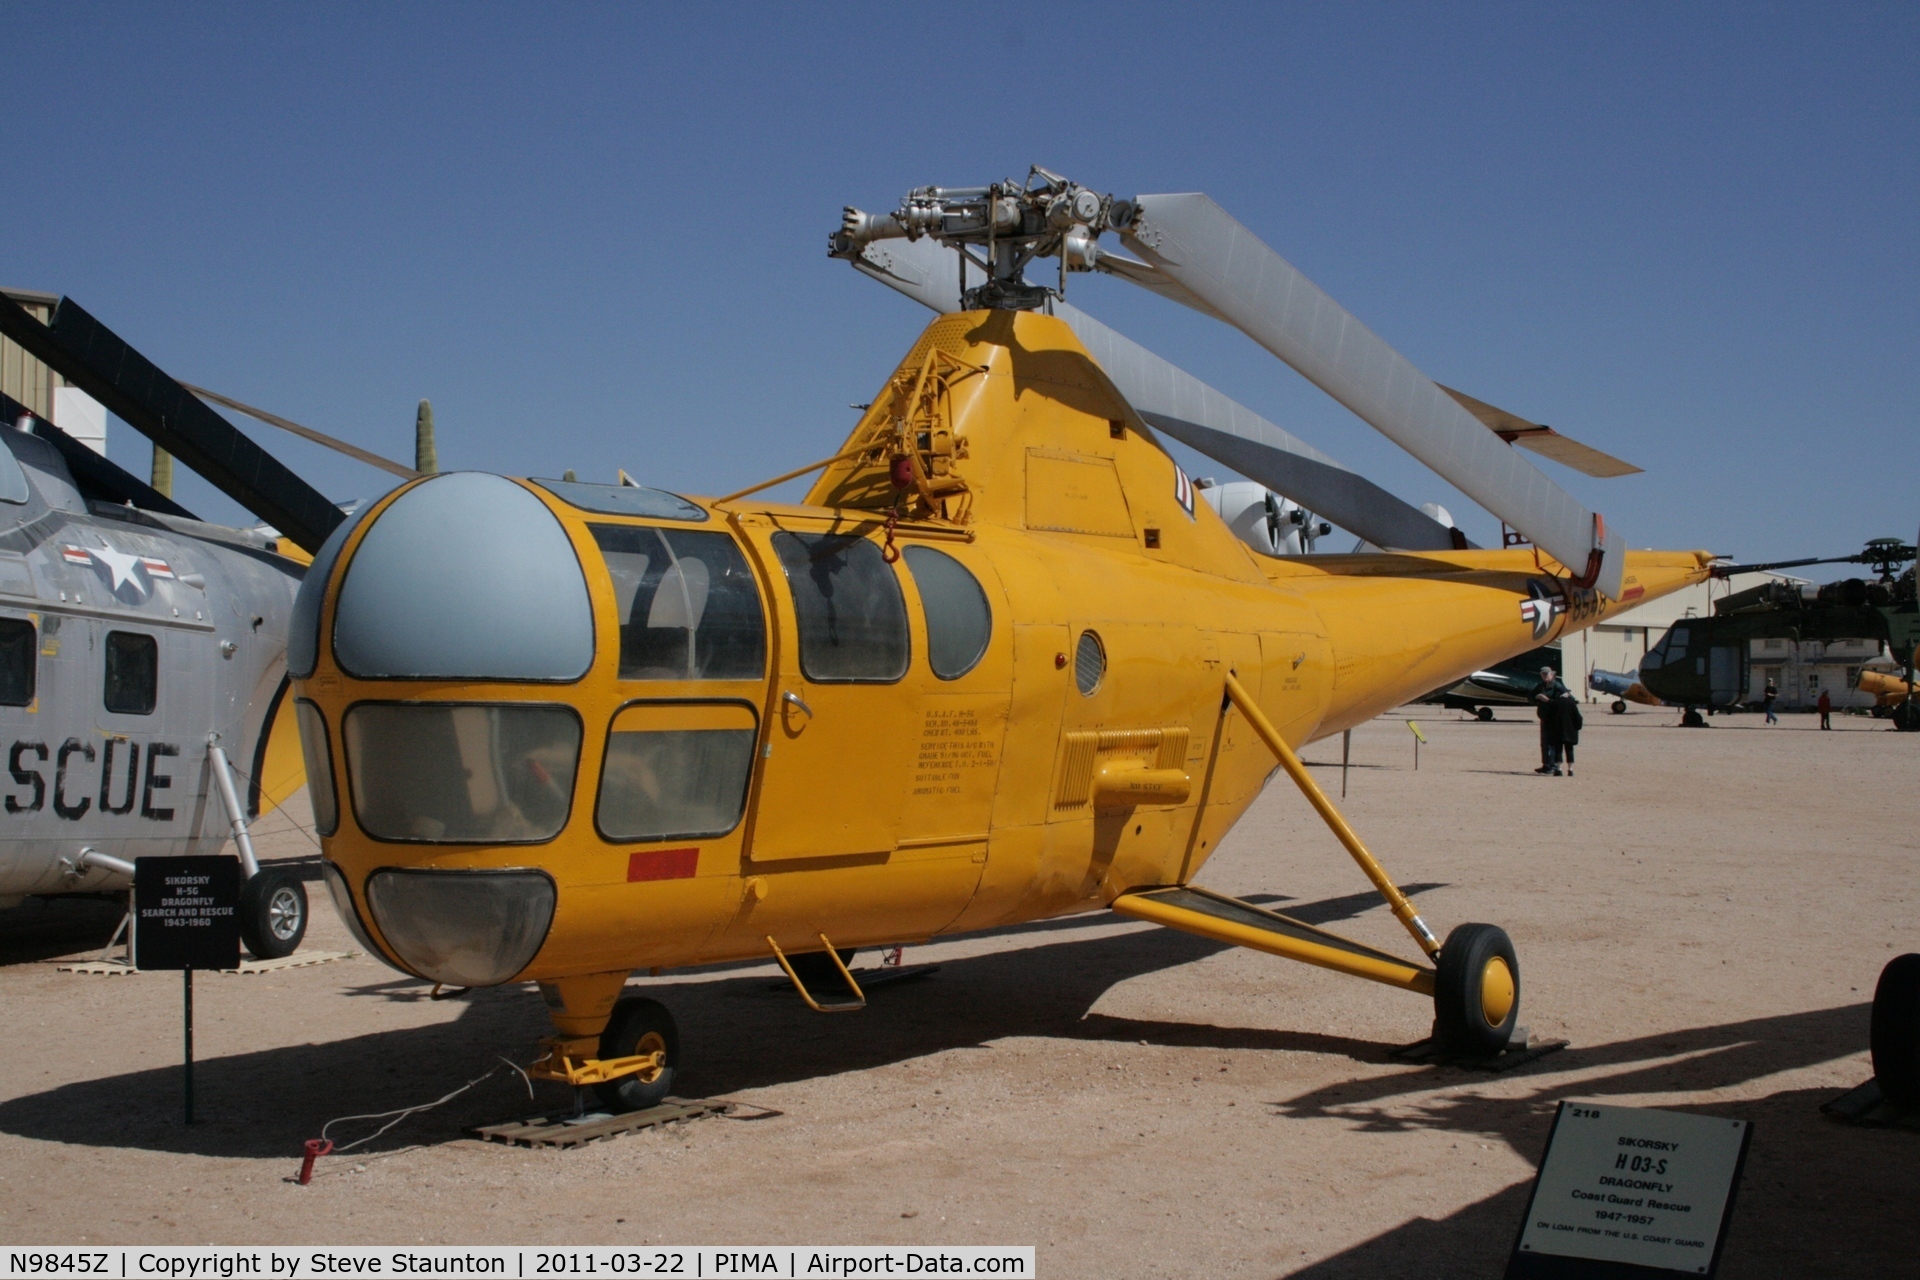 N9845Z, 1949 Sikorsky H-5G C/N 51127, Taken at Pima Air and Space Museum, in March 2011 whilst on an Aeroprint Aviation tour